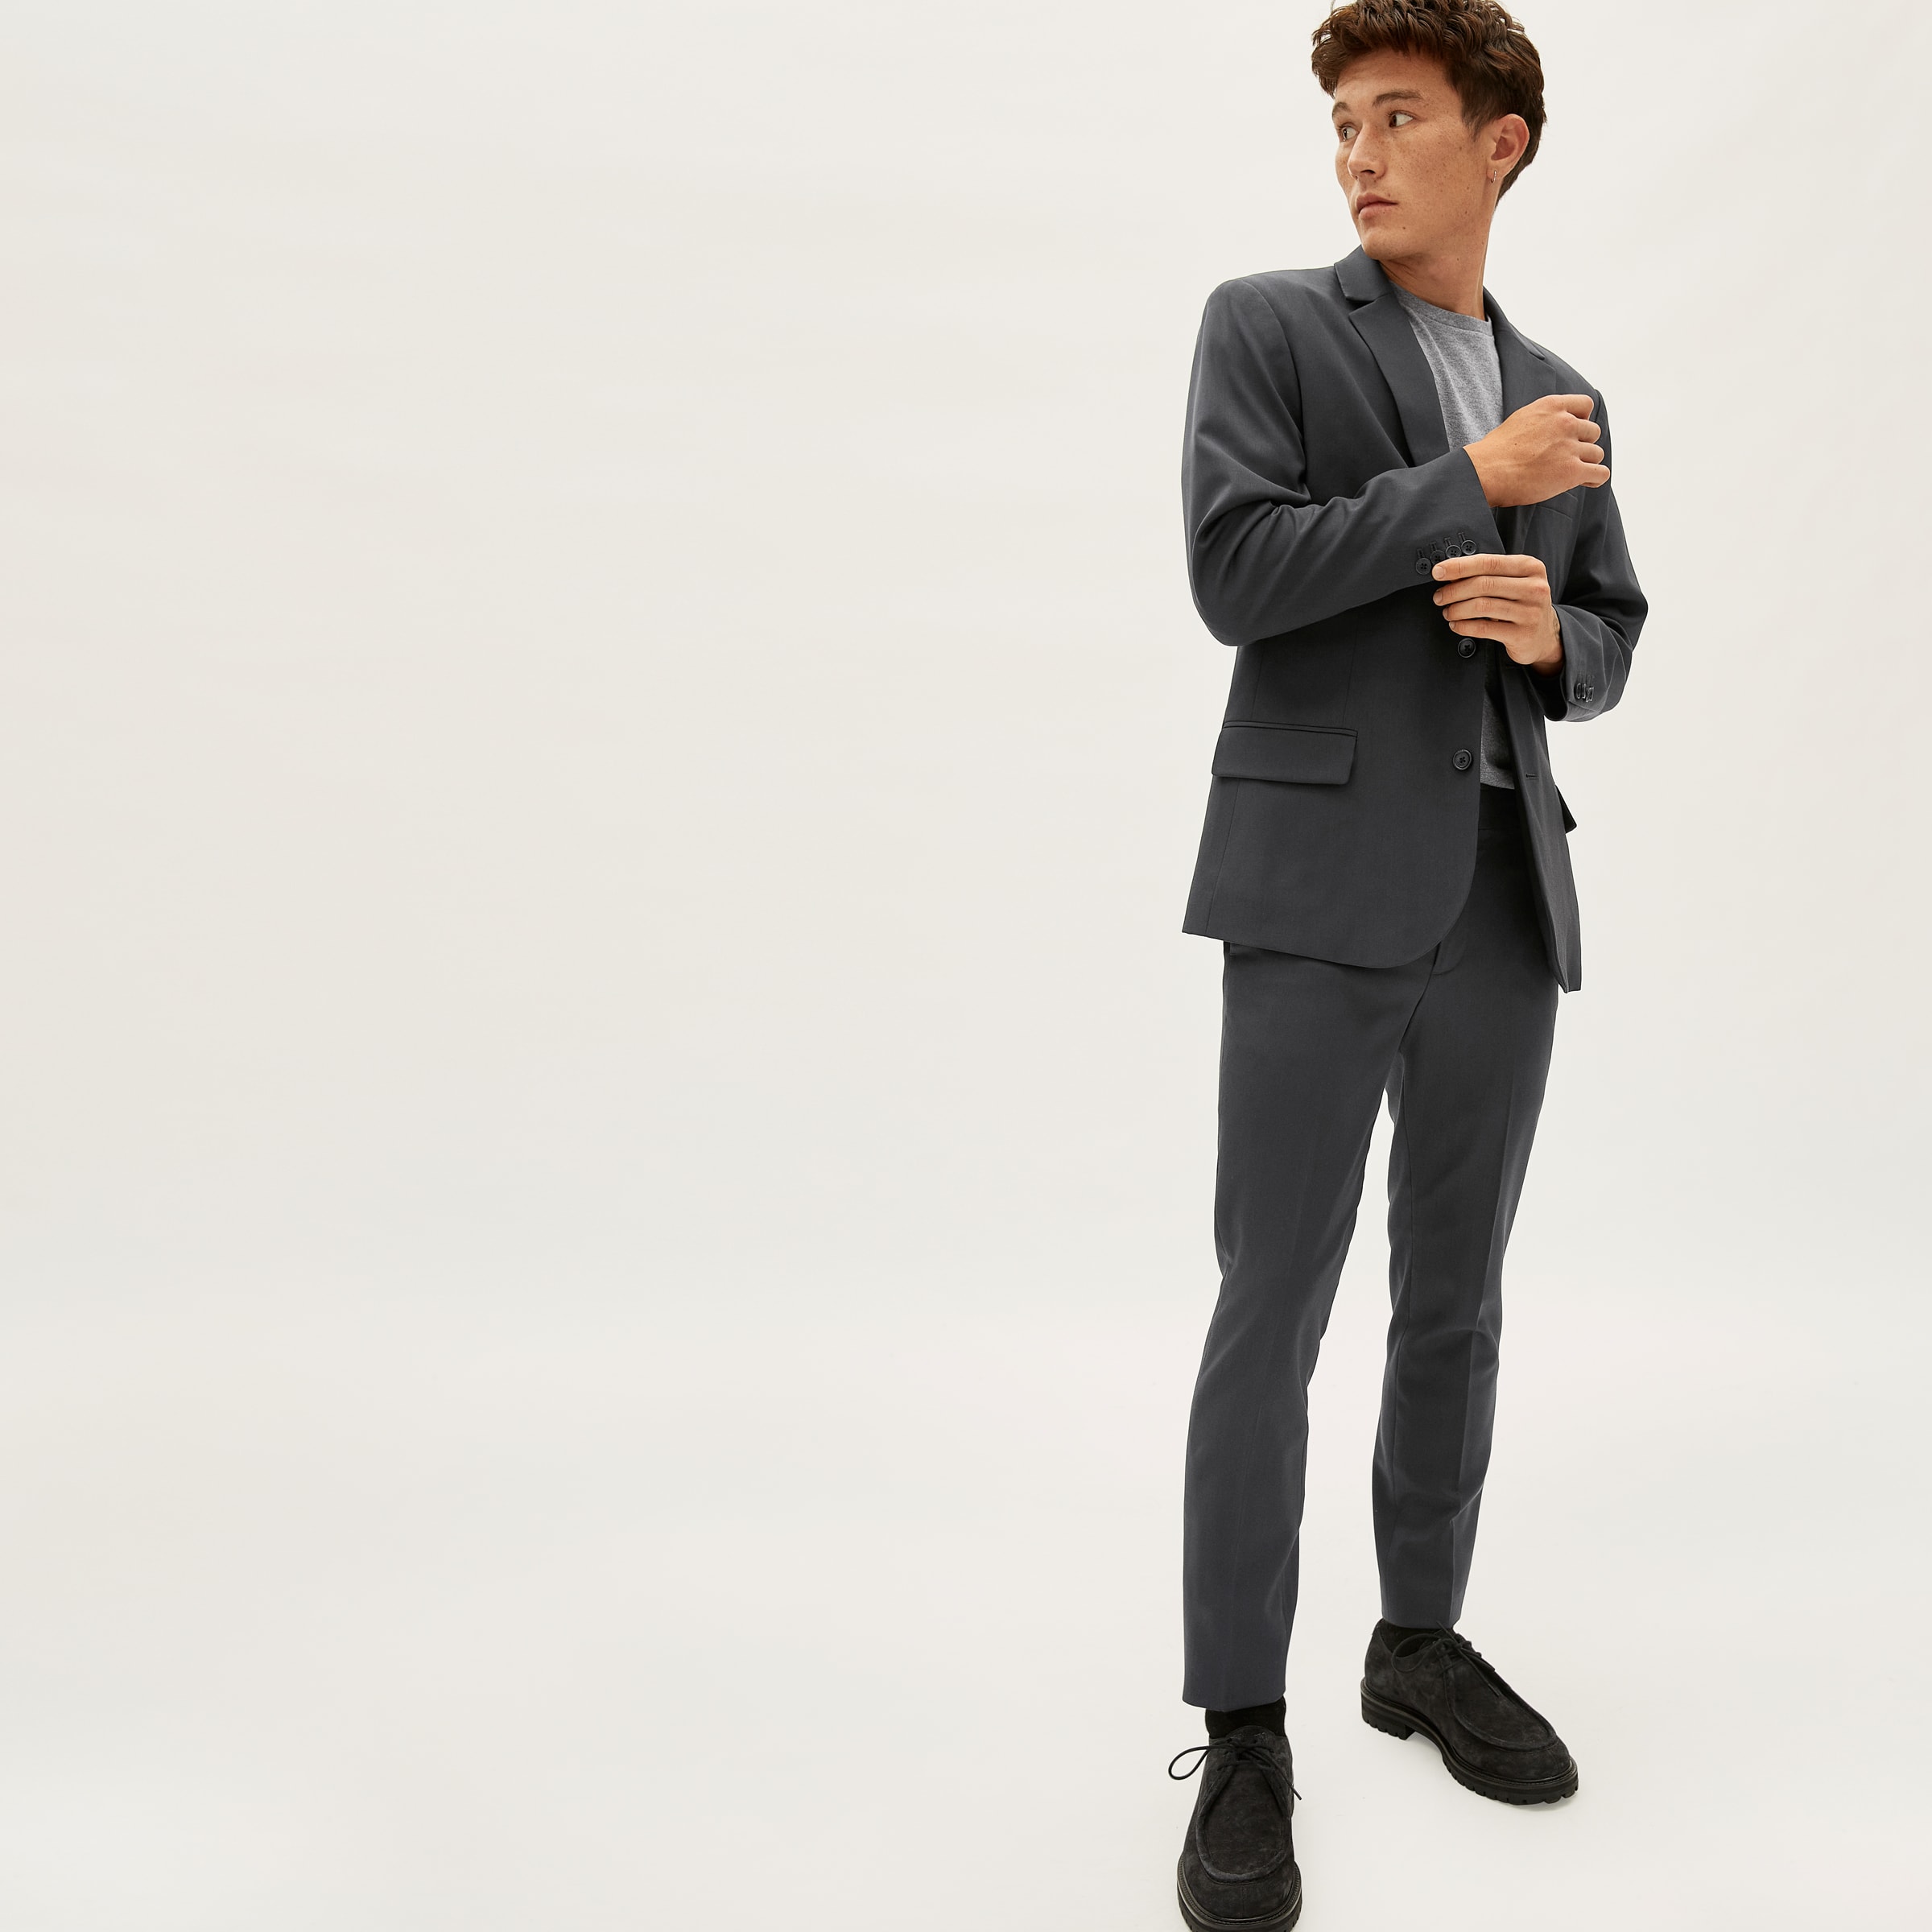 Ditch Your Jeans for These Slim Wool Pants | GQ